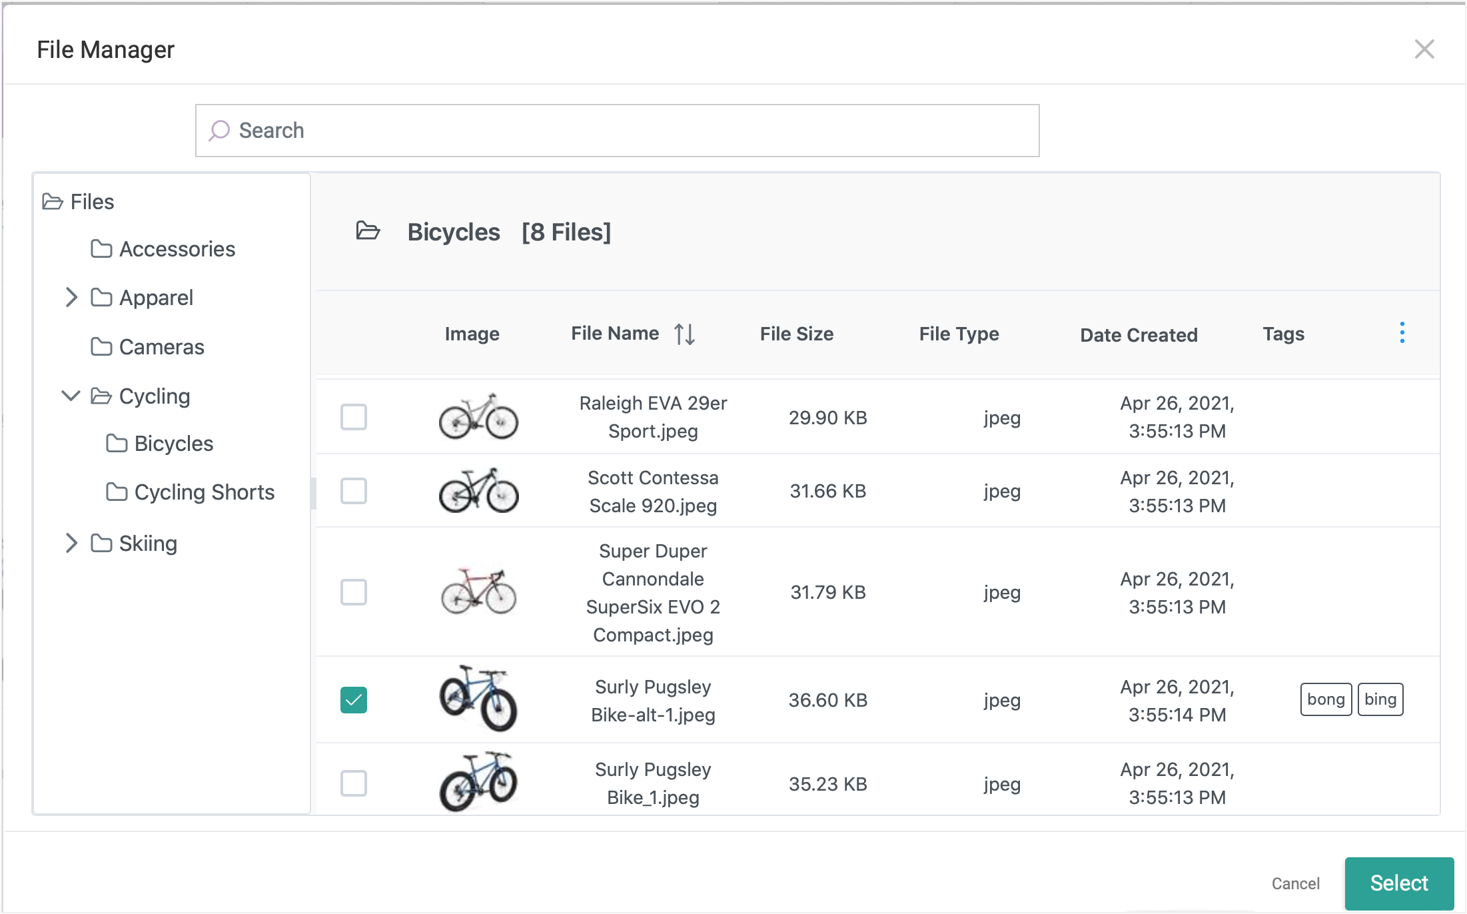 Pop-up version of the file manager in the product catalog